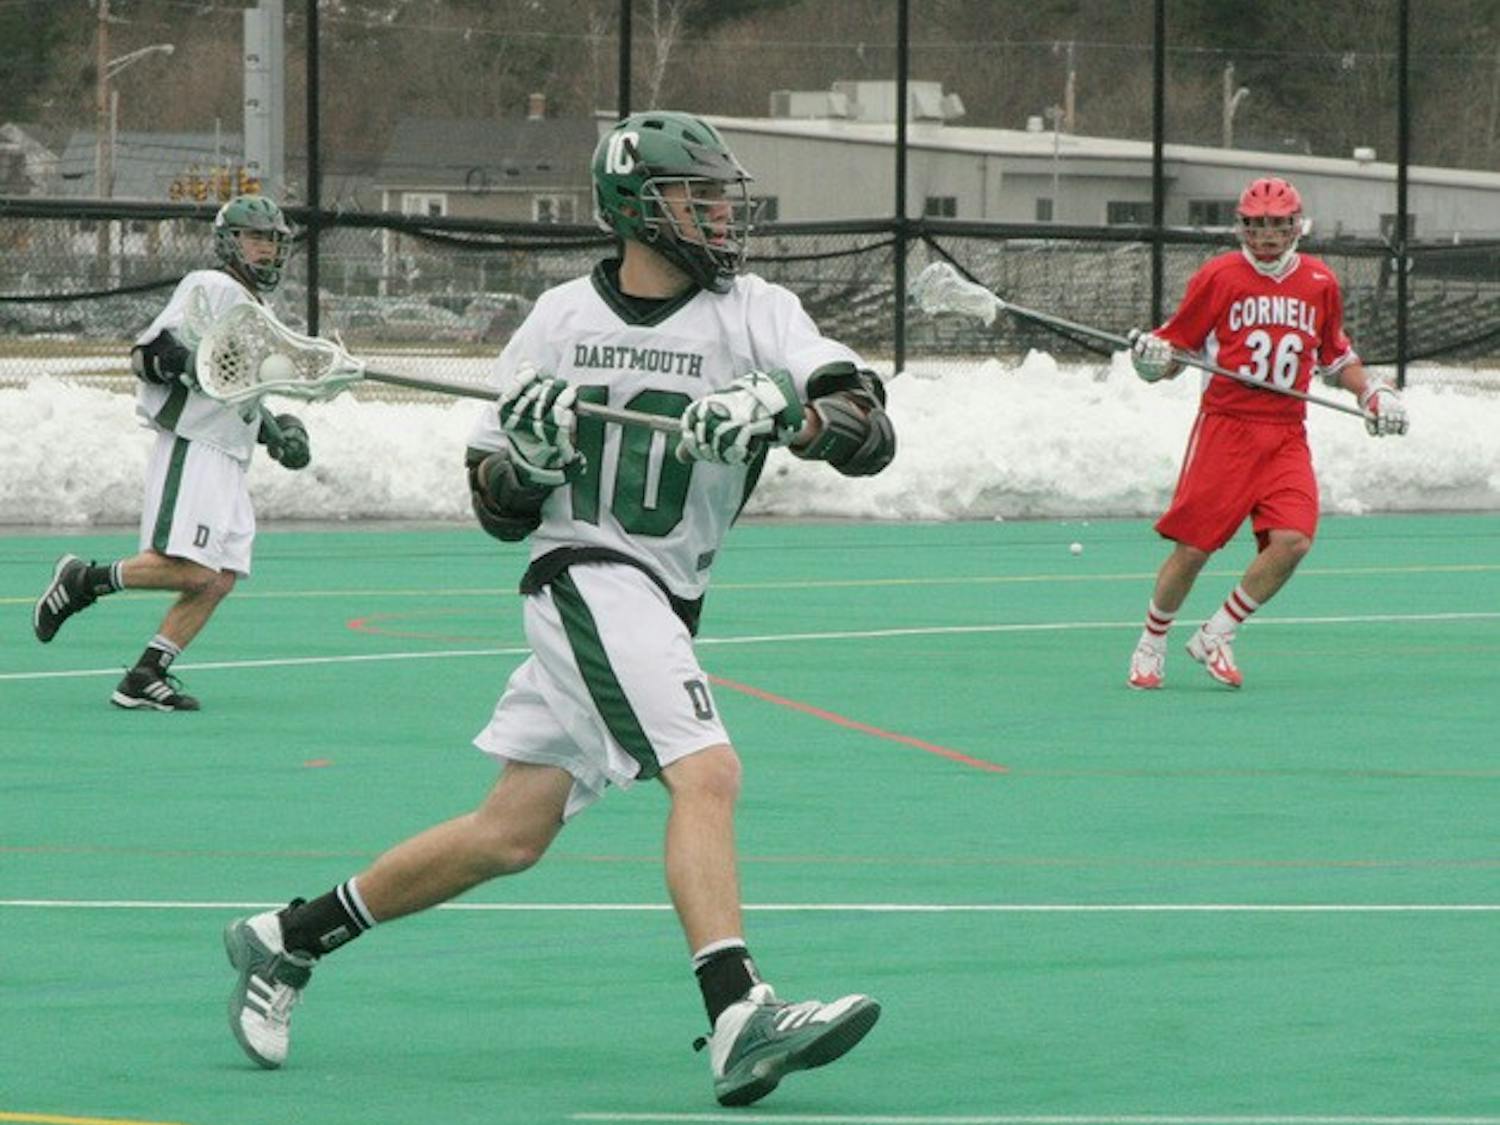 Brian Koch '09 scored the game's first goal, giving the Big Green a short-lived 1-0 advantage over visitor Cornell.